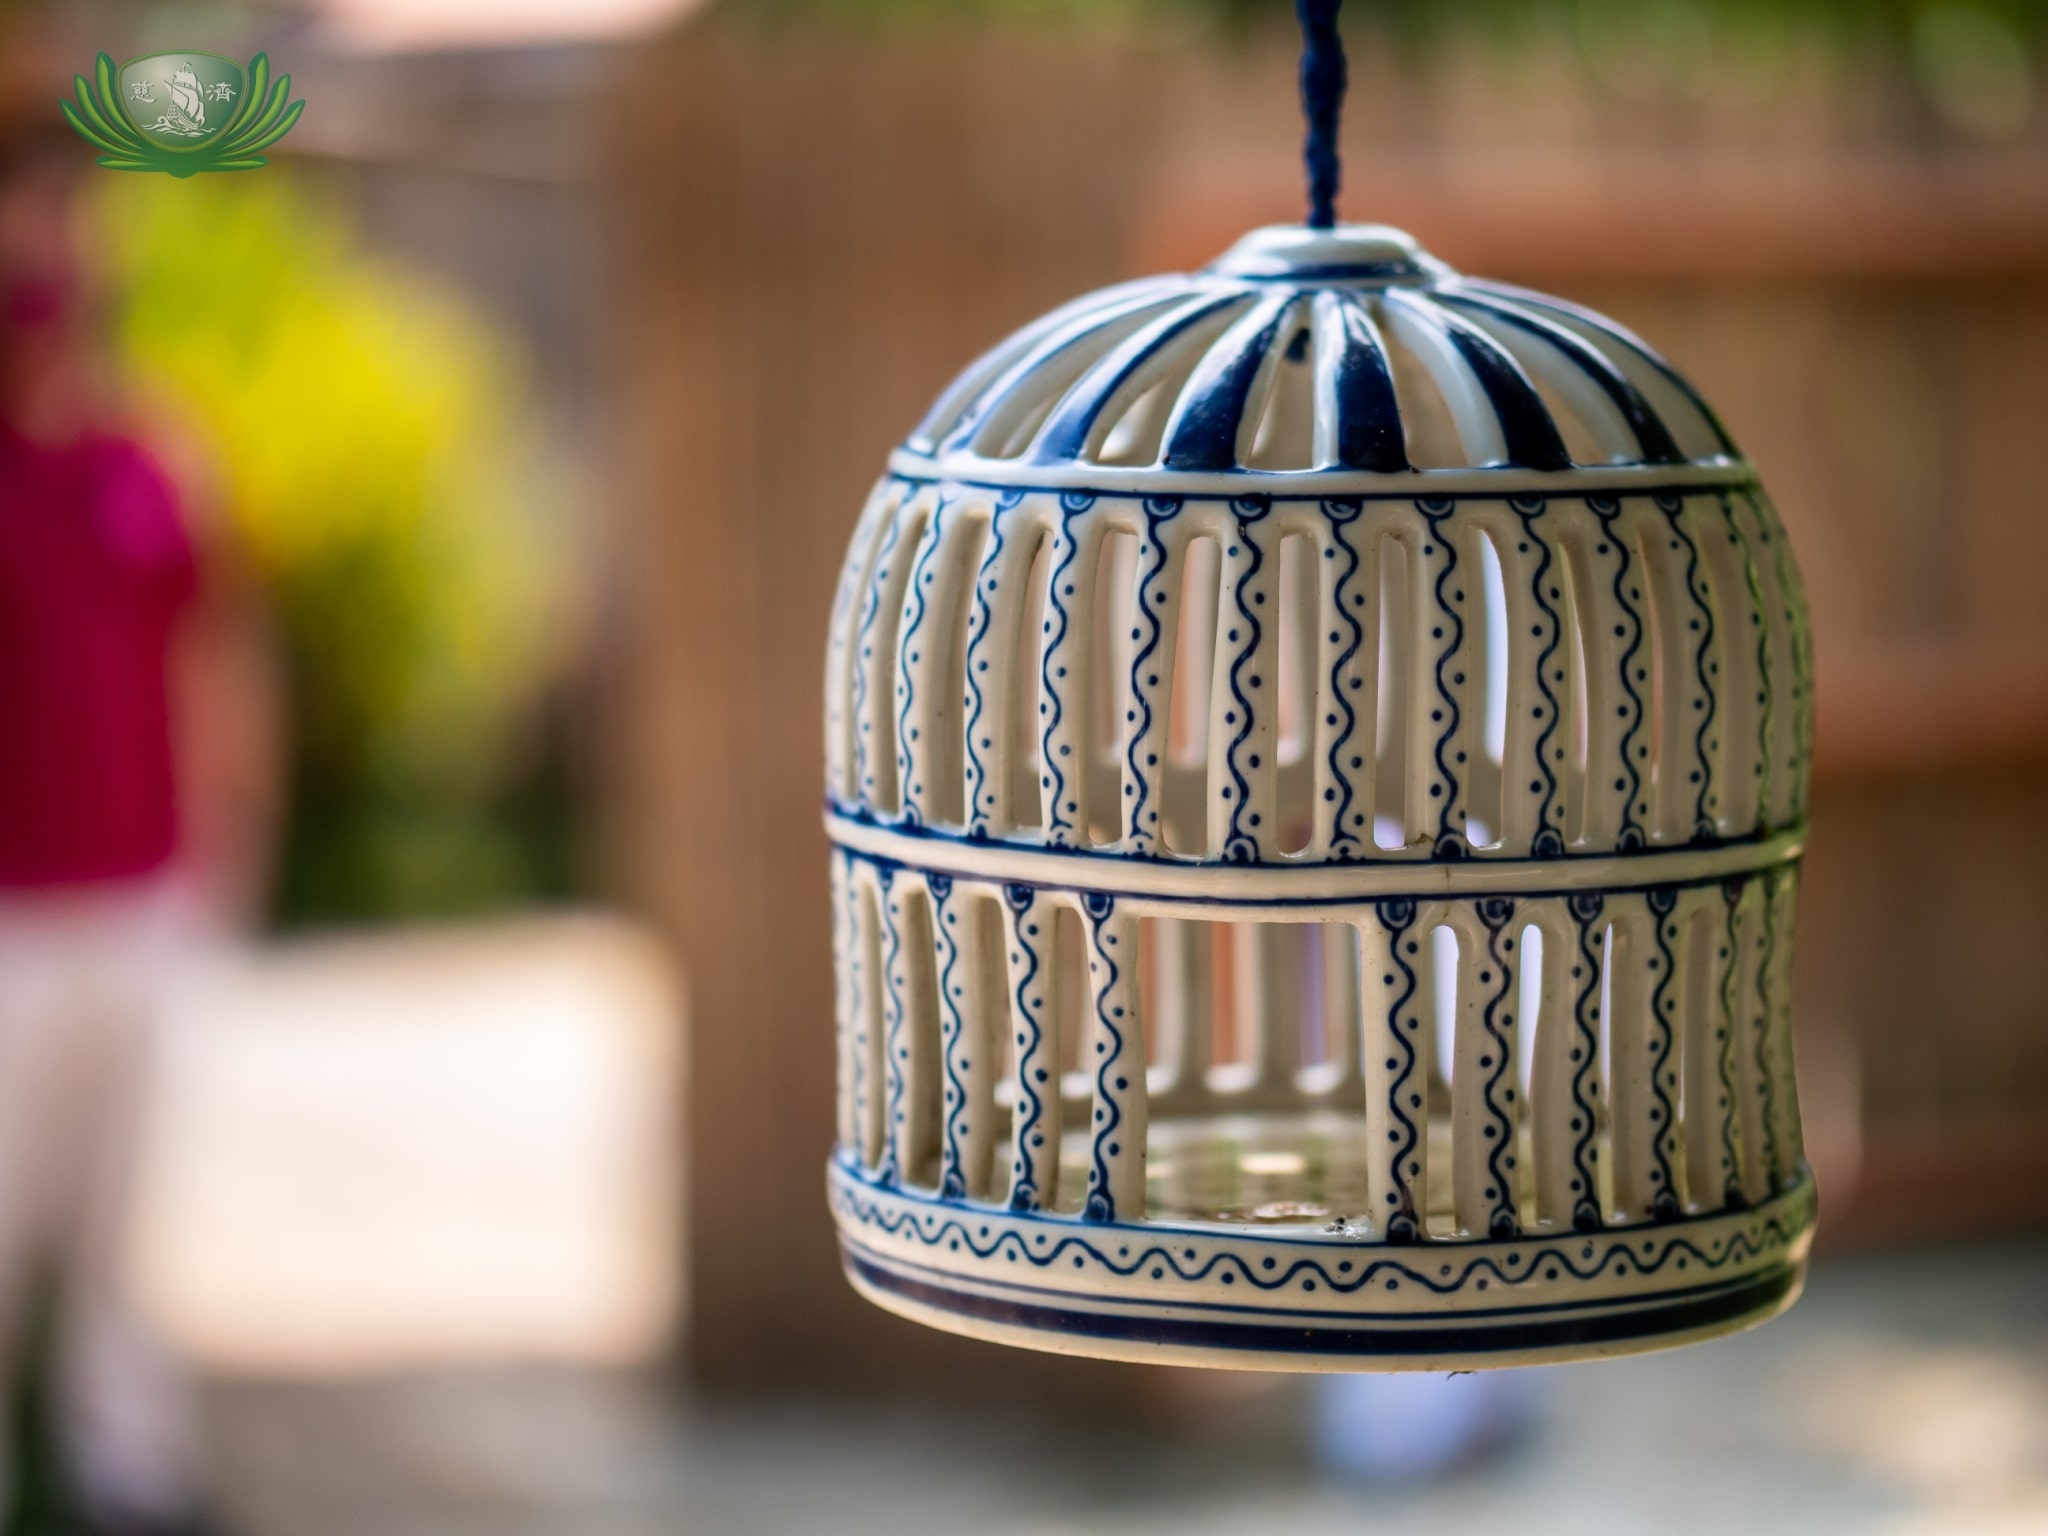 Some of the beautiful decor in Sonya's Garden, a porcelain bird cage.【Photo by Daniel Lazar】